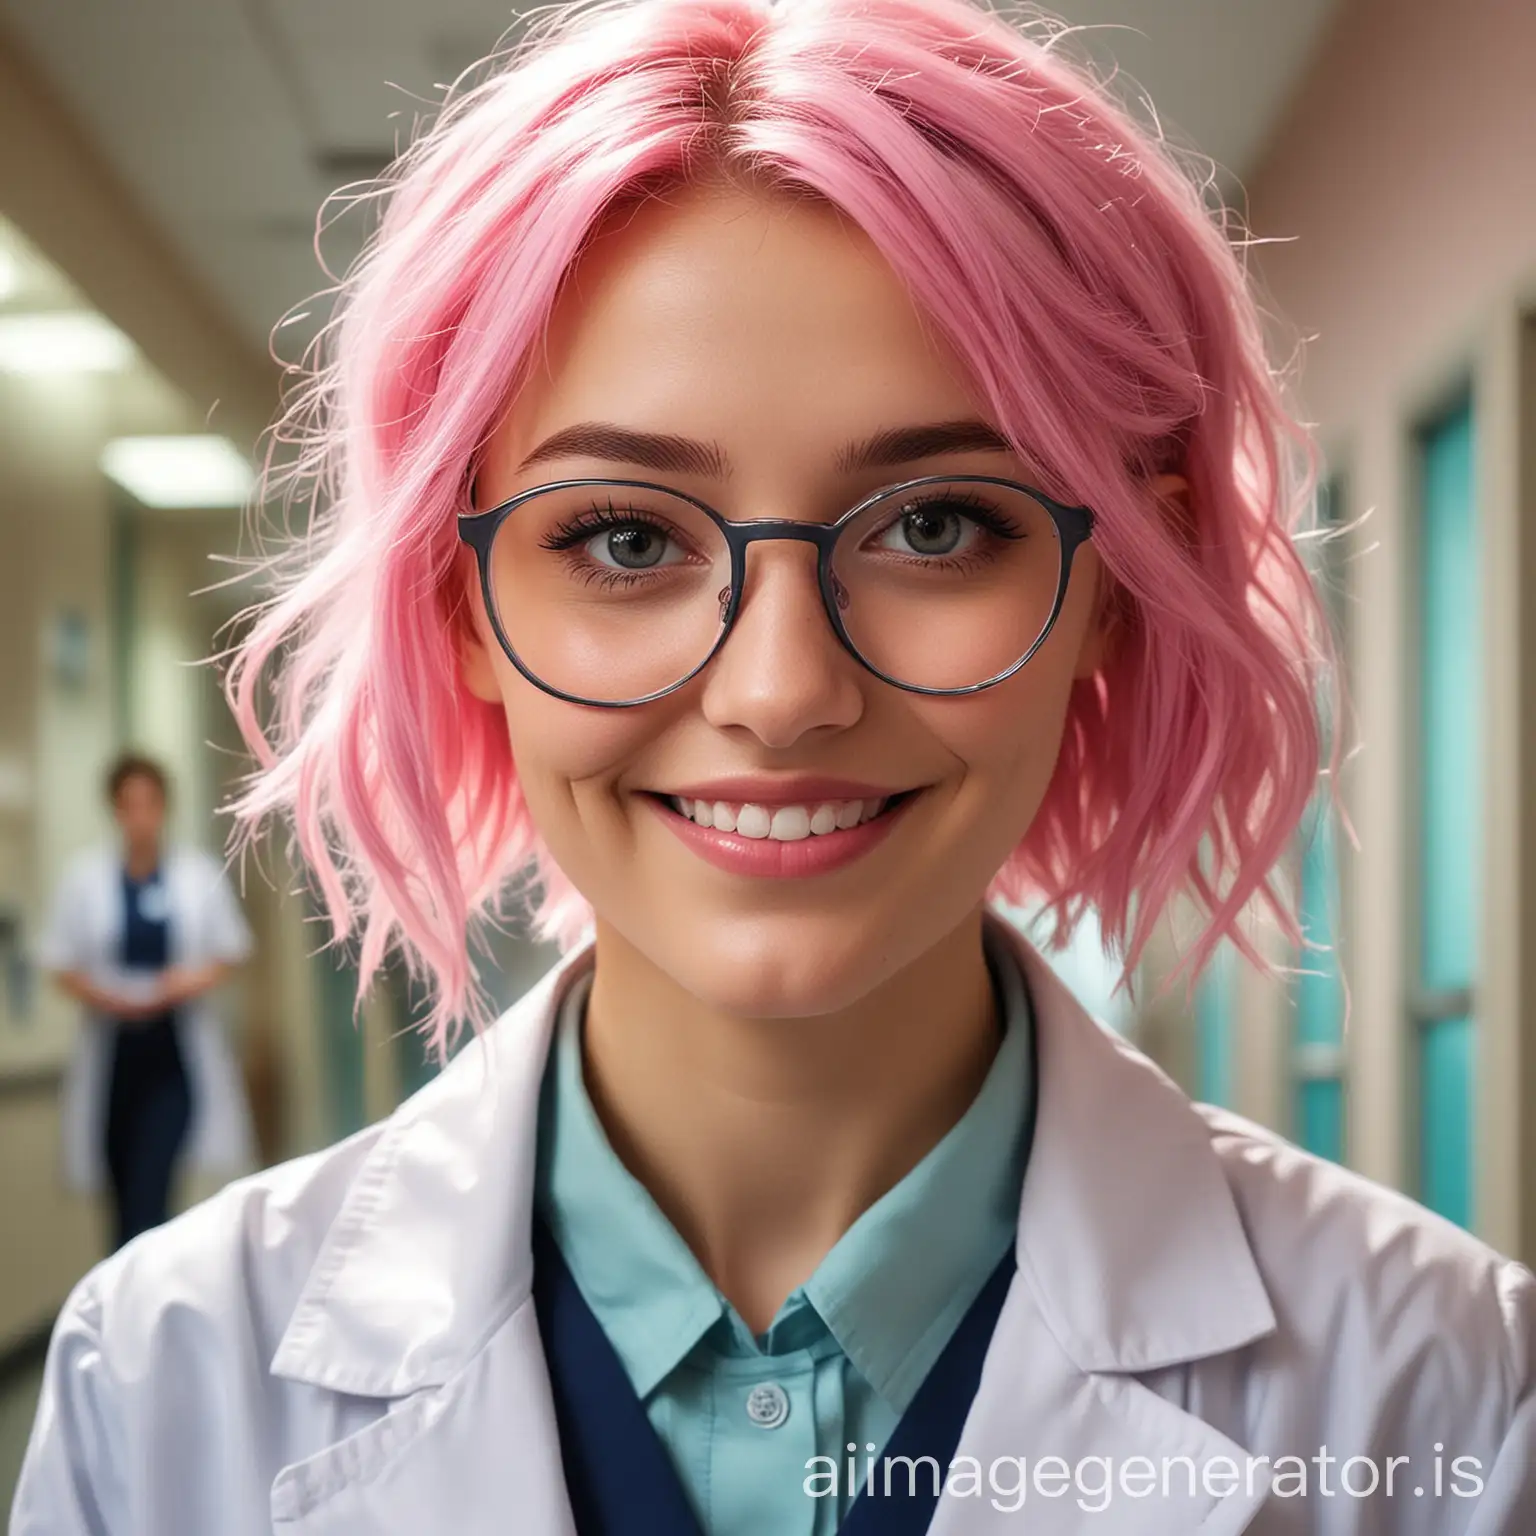 a breathtakingly beautiful young doctor, her delicate features framed by a pair of stylish glasses. She exudes an air of intelligence and warmth, her pink hair adding a playful touch to her professional appearance. Her smile is infectious, revealing a set of perfectly aligned teeth, and her gaze is fixed on something just beyond the viewer's periphery, conveying a sense of focus and dedication. She's dressed in a crisp white coat, which accentuates her slender figure, and her name tag identifies her as Dr. Rosie. The background of the image shows a busy hospital corridor, with nurses and patients going about their daily routines, further emphasizing her role as a caring and competent medical professional., cartoon-style art, superb linework, nice colors and composition, bold linework, close-up, (masterpiece), cute art by Dana Terrace, by Rebecca Sugar, by ry-spirit, amazing and wholesome cartoon-style art, cute art style, (trending on artstation)